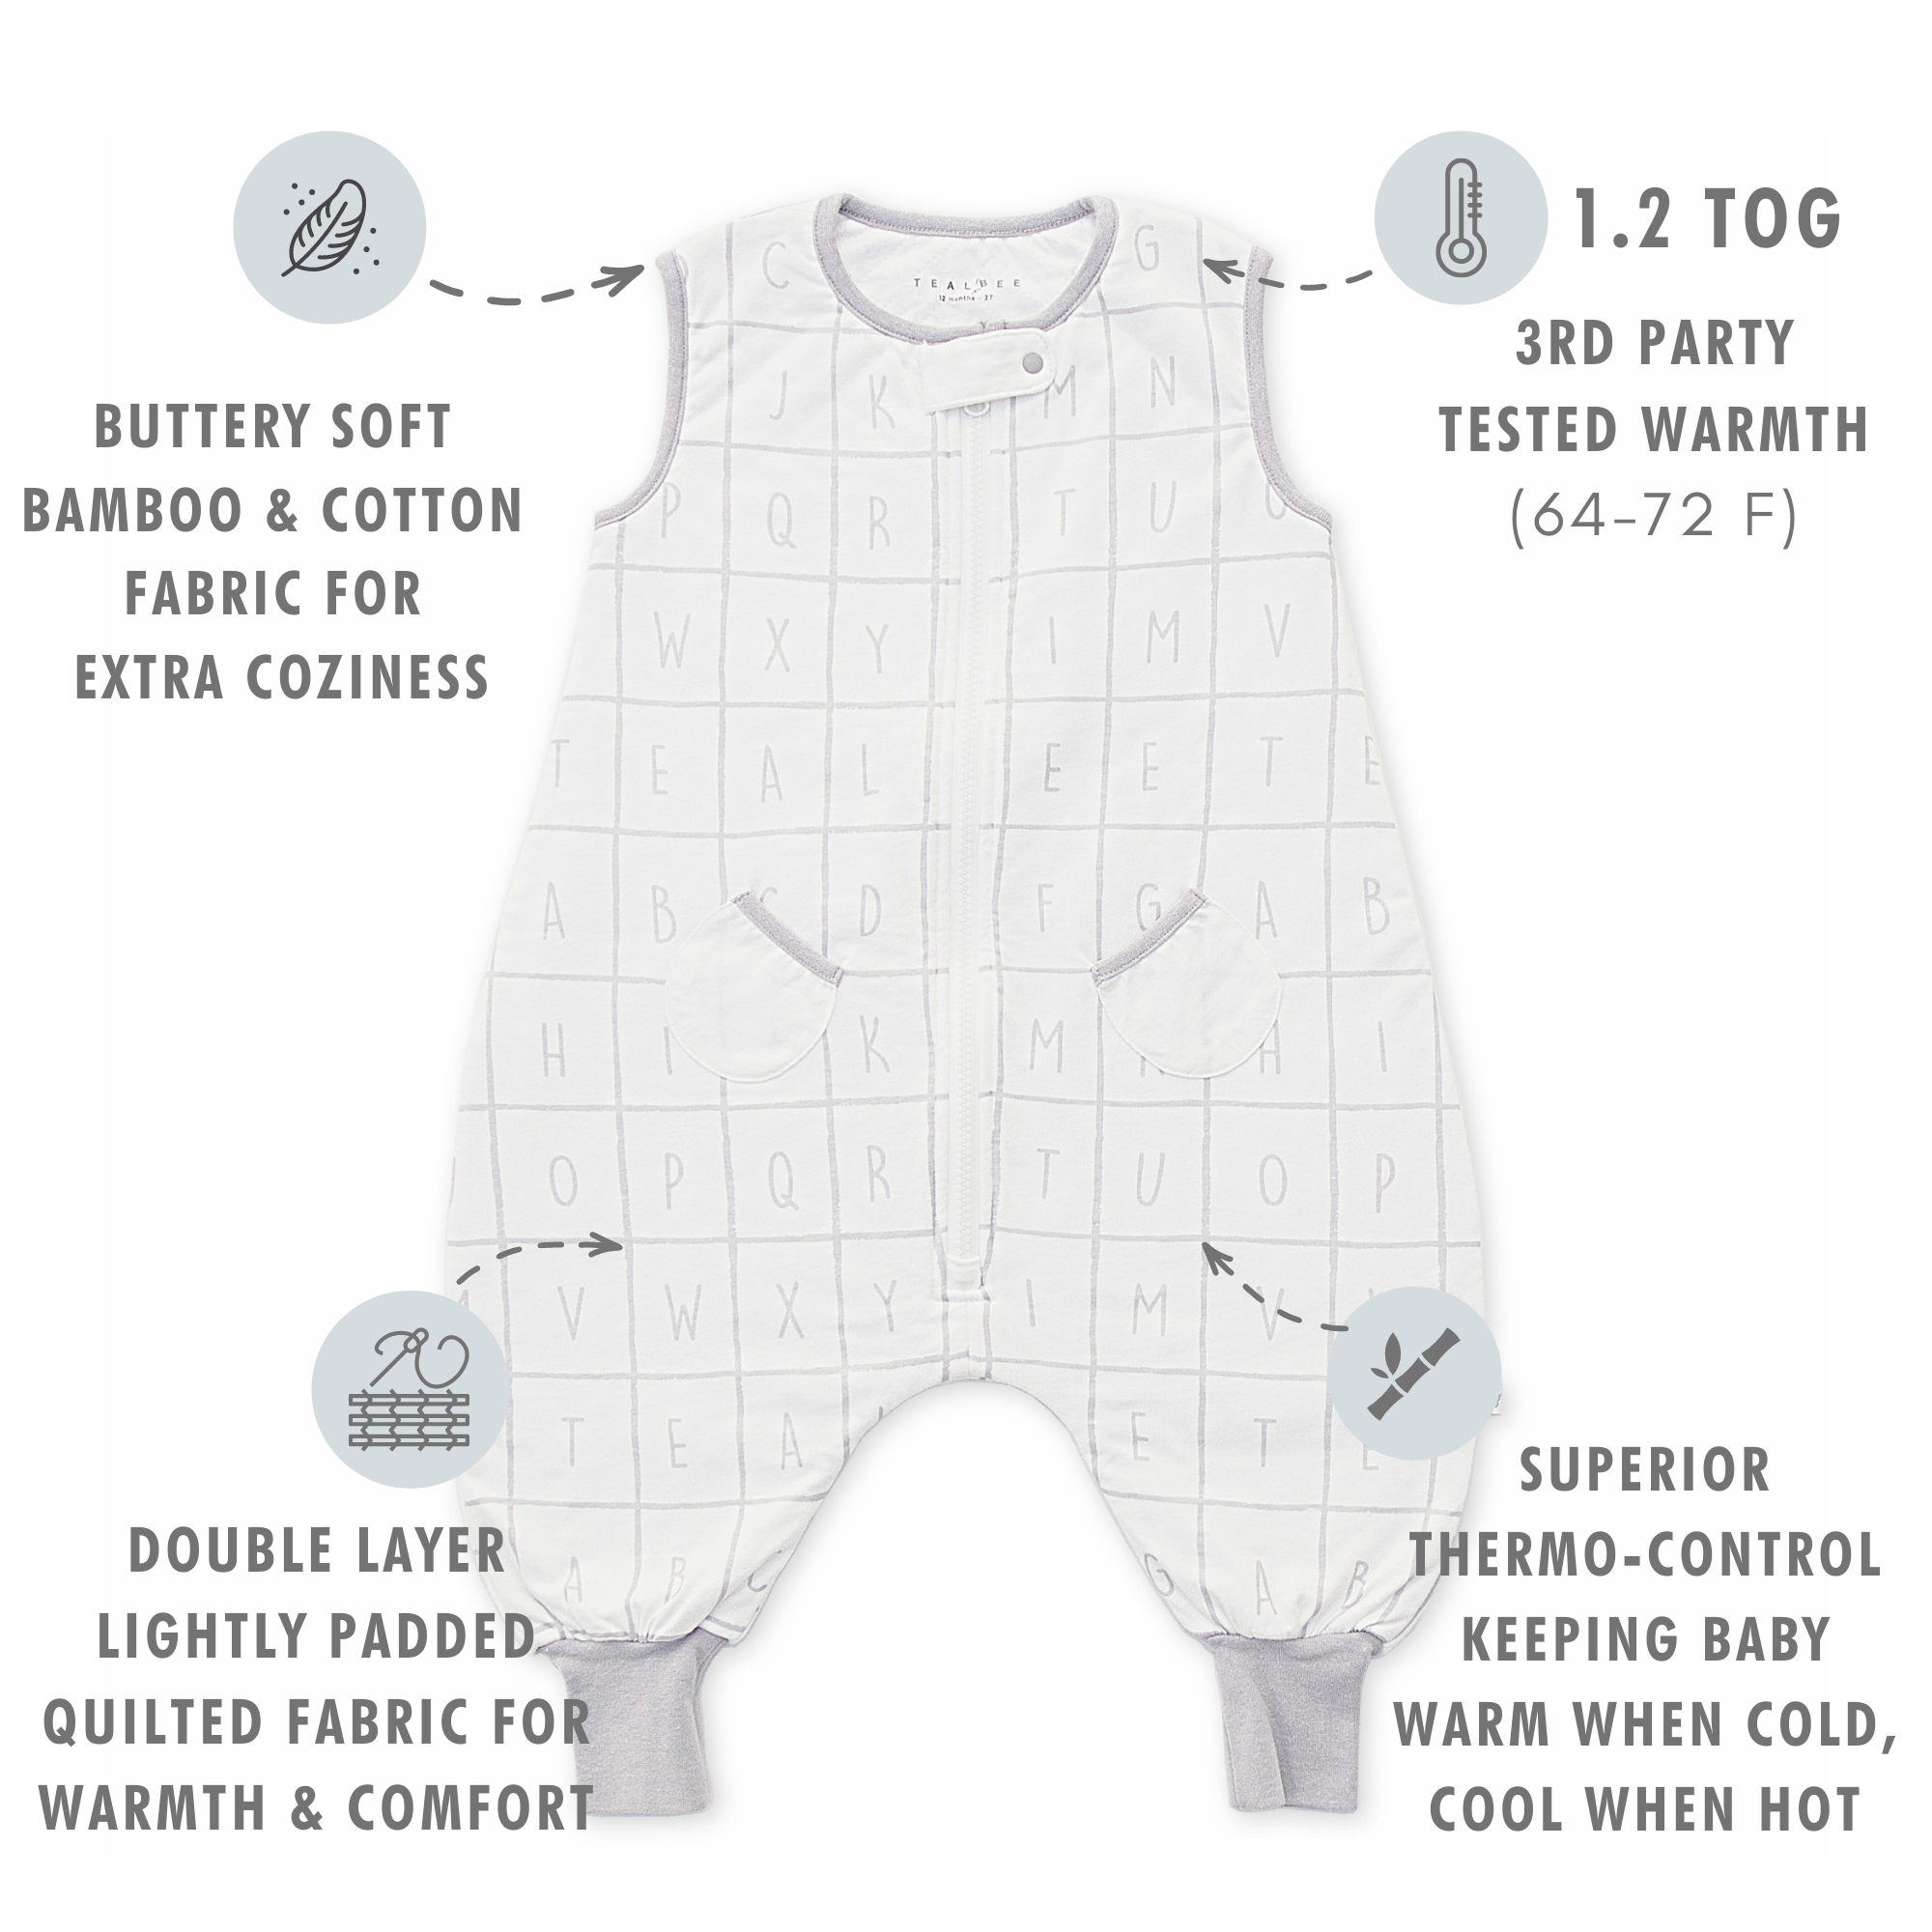 Tealbee Dreamsuit - Buttery soft bamboo & cotton fabric for extra coziness, 1.2 TOG 3rd party tested warmth (64 - 72 F), Double layer lightly padded quilted fabric for warmth and comfort, superior thermo-controlkeeping baby warm when cold, cool when hot.